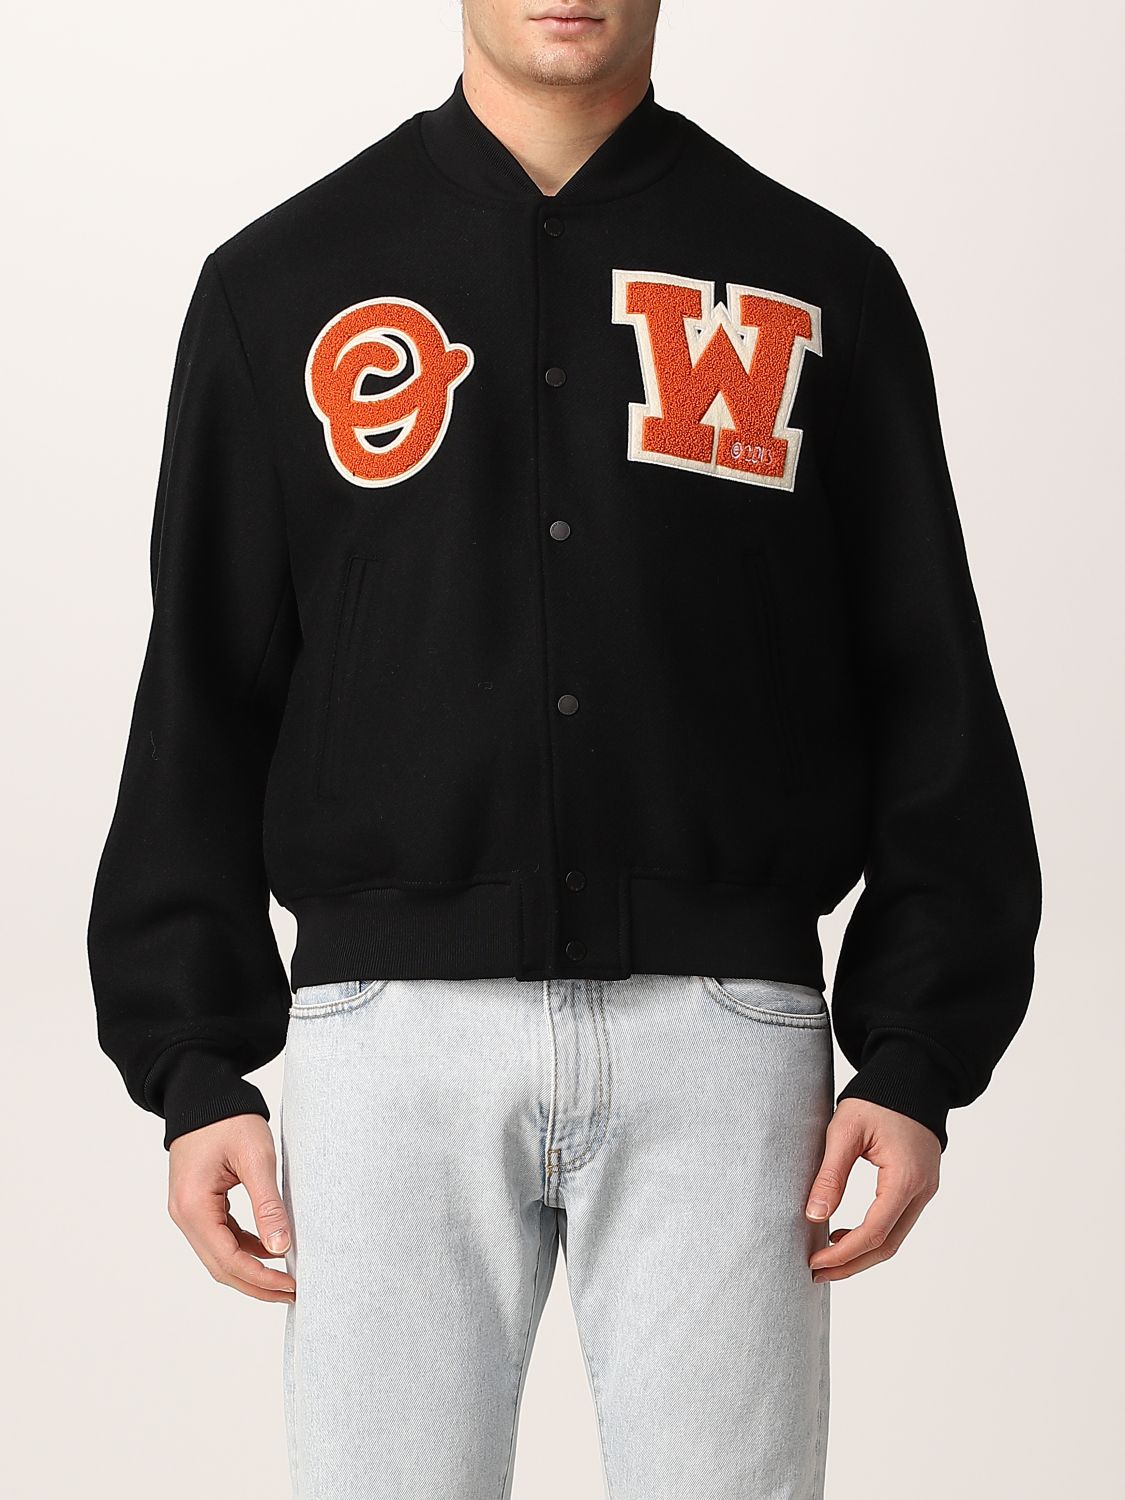 OFF-WHITE: wool blend jacket with OW patch - Black | Off-White jacket